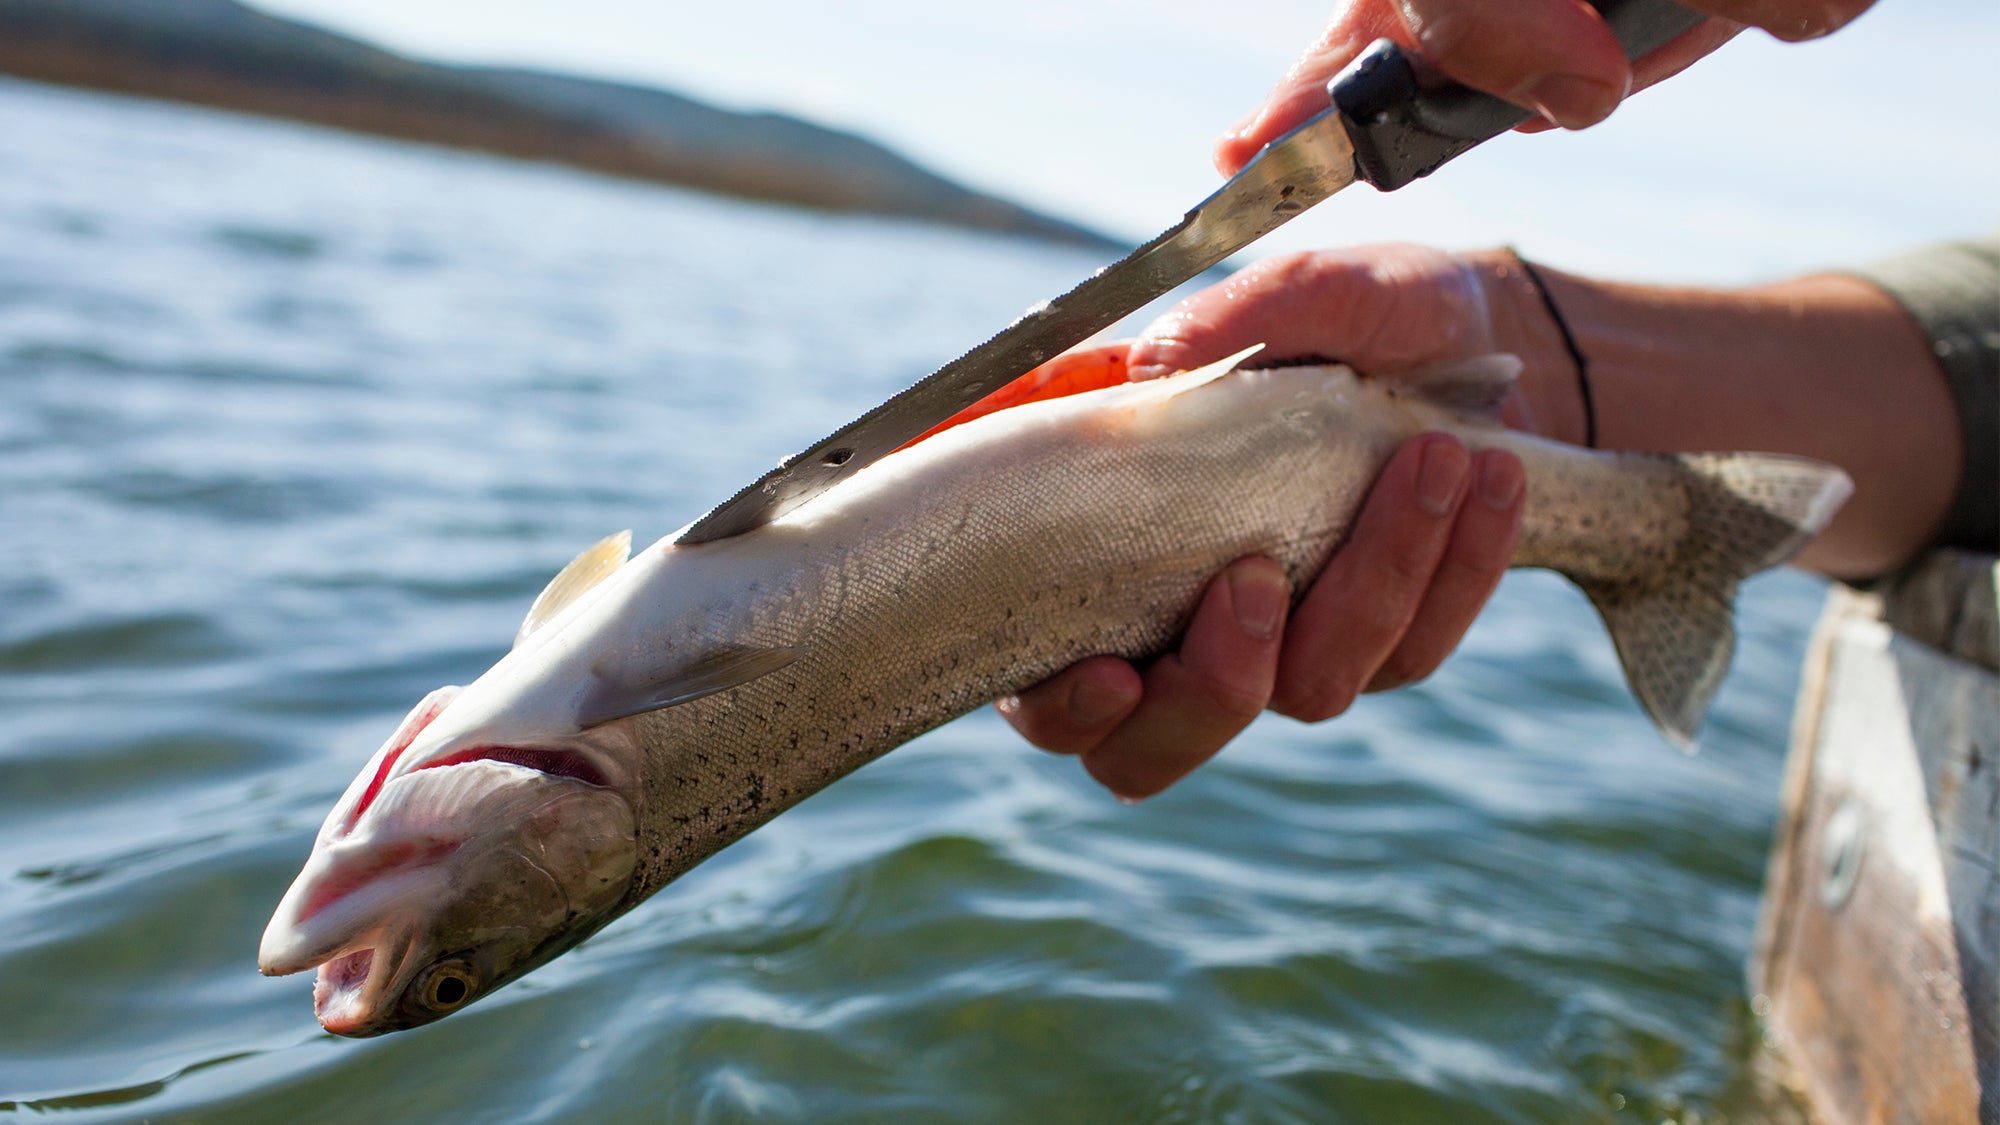 How to Clean a Trout, with Video